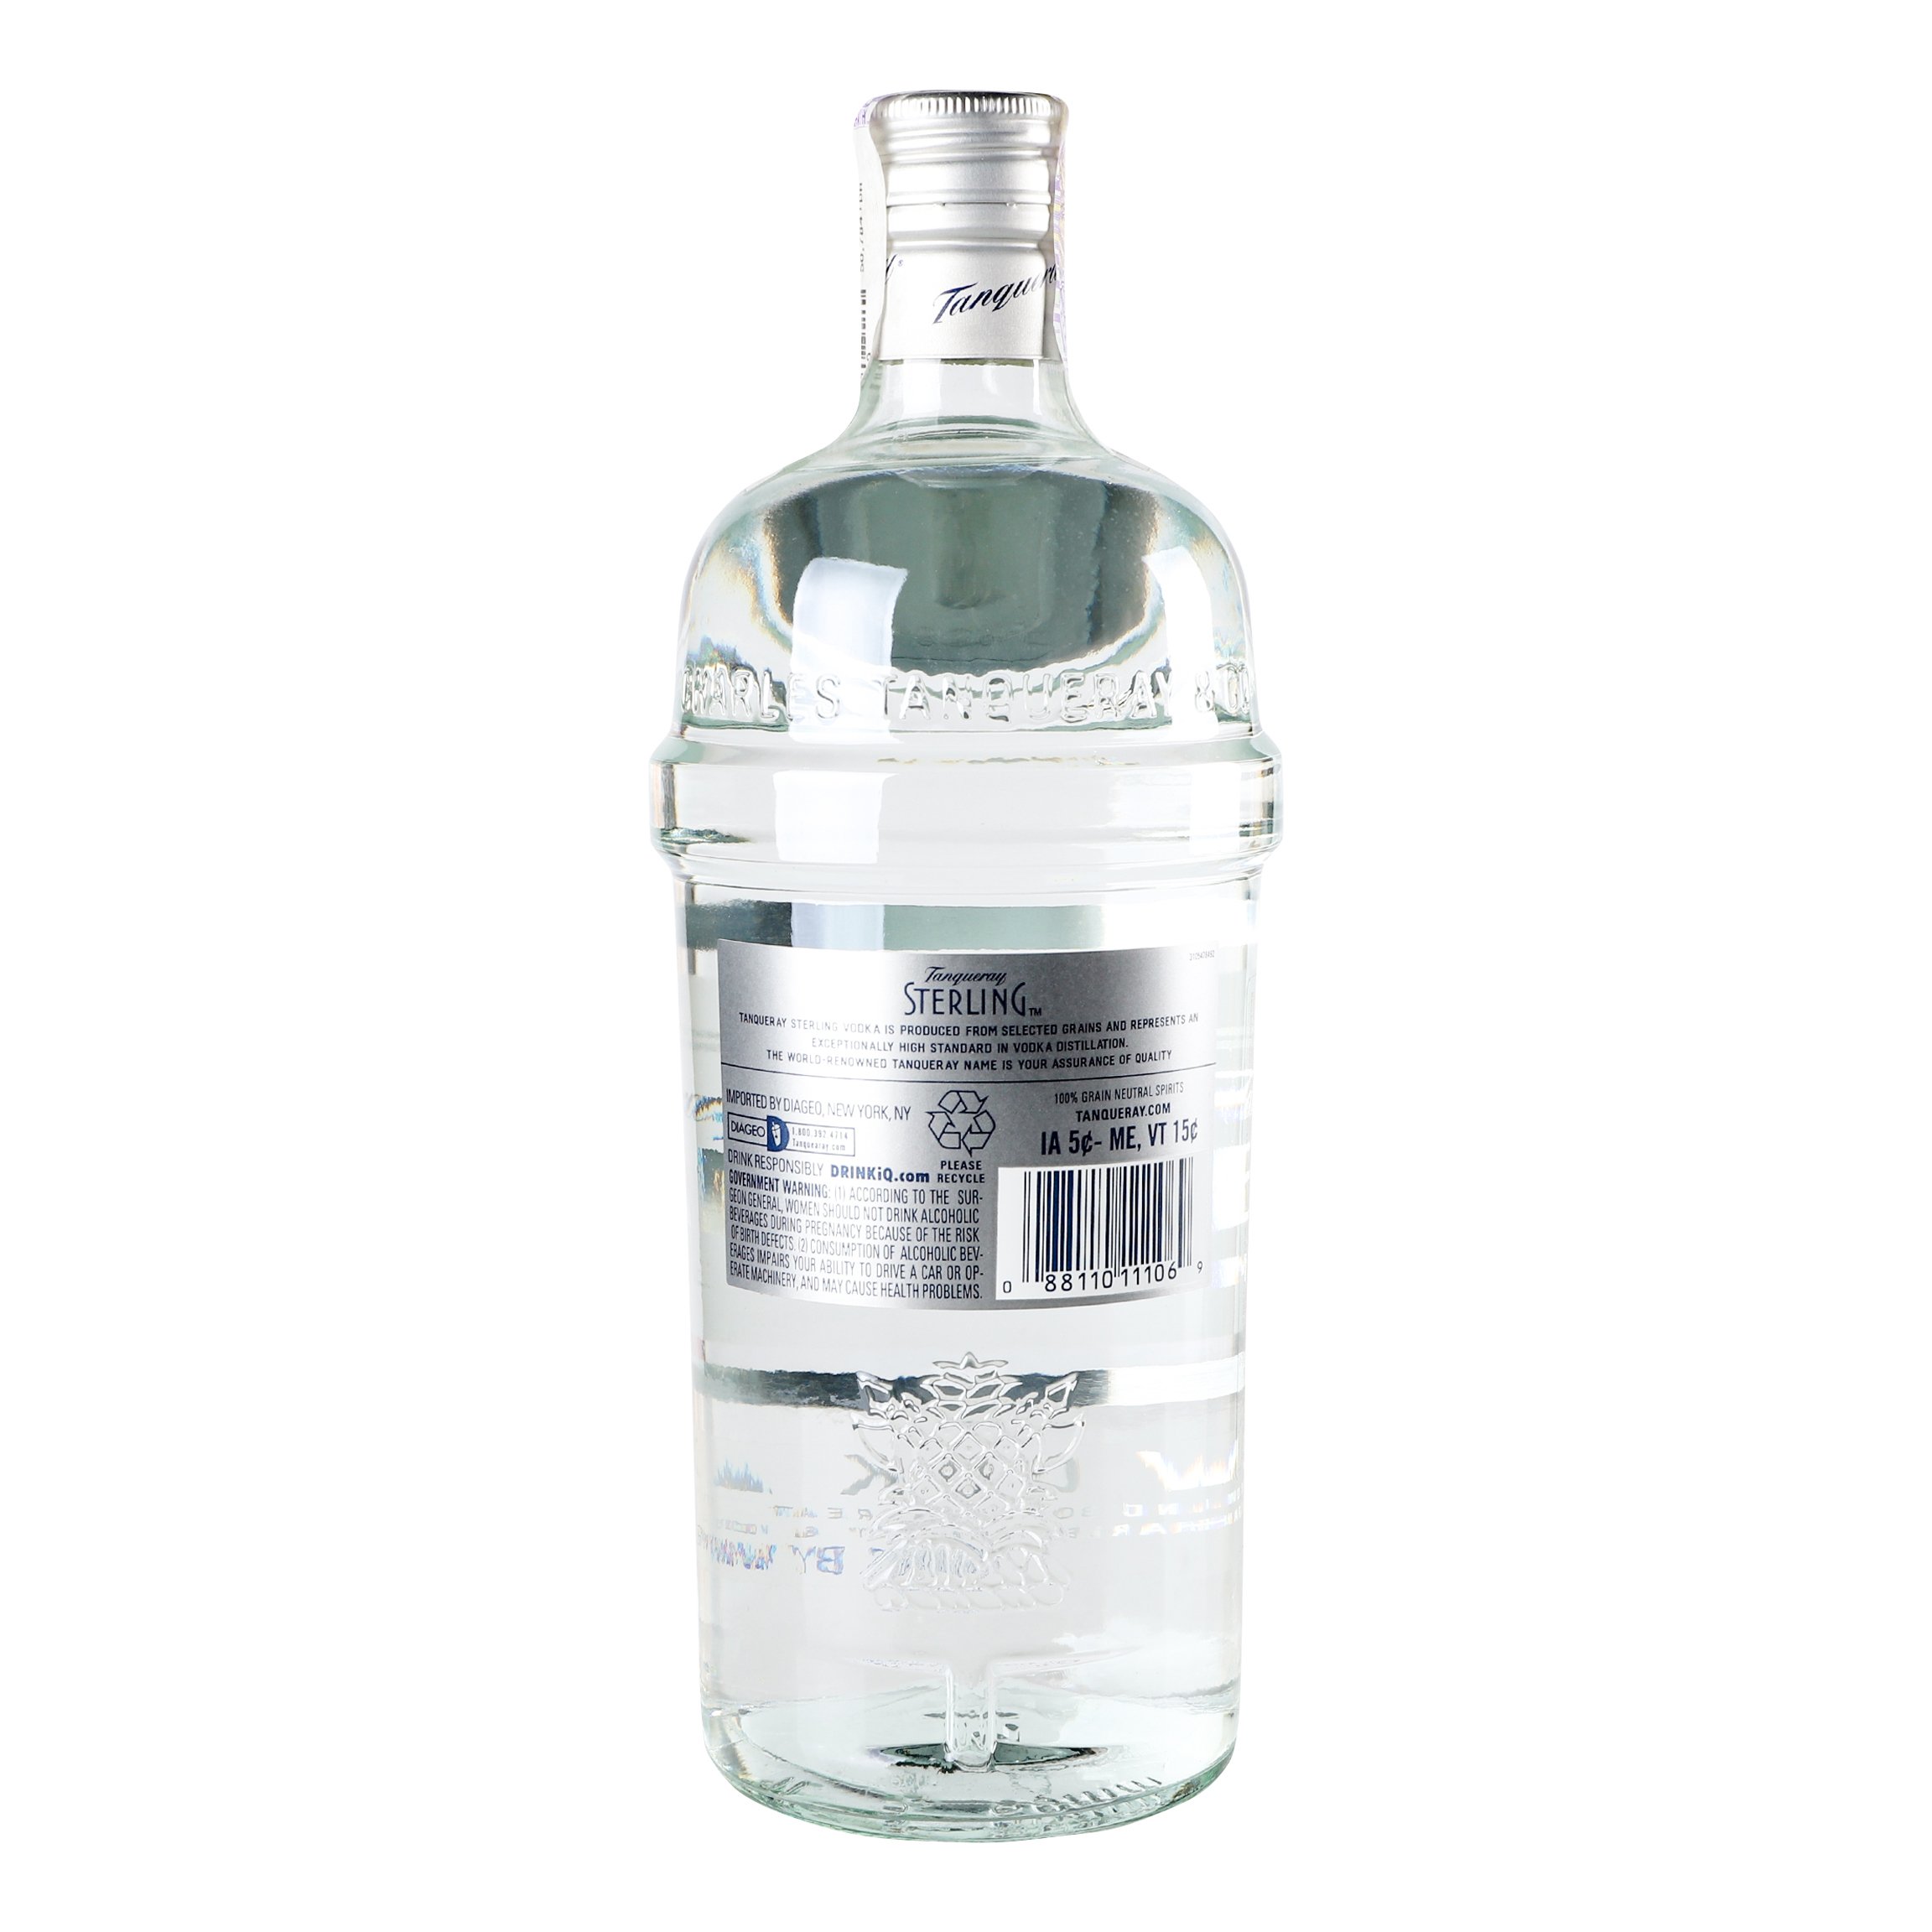 Водка Tanqueray Sterling, 40%, 1 л - фото 2